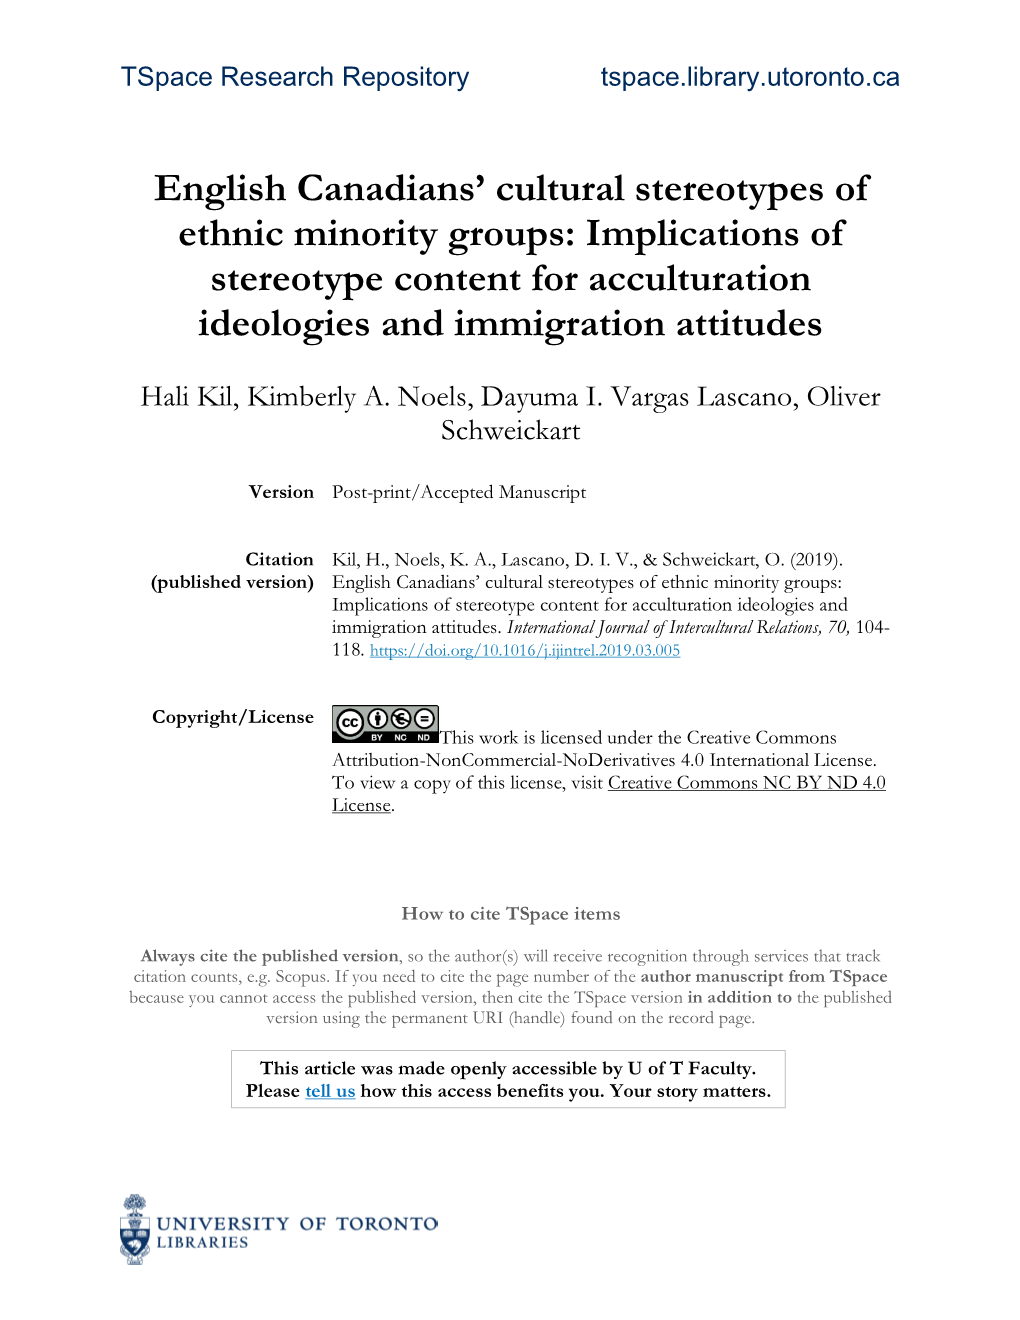 English Canadians' Cultural Stereotypes of Ethnic Minority Groups